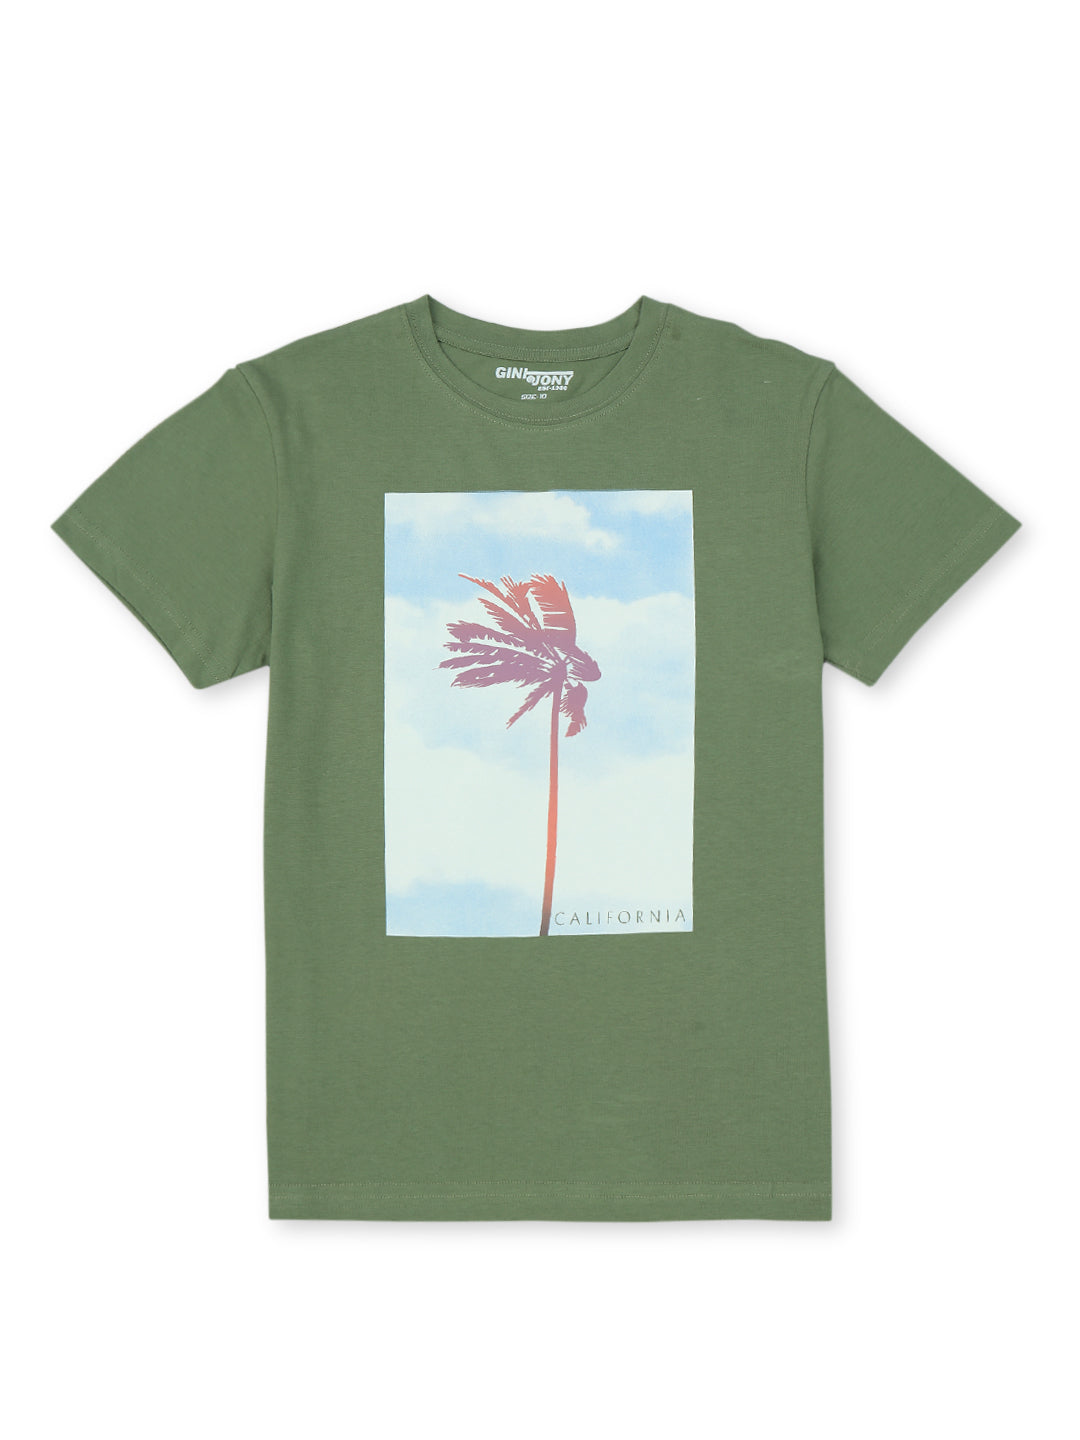 Boys Hedge Green Cotton Solid T-Shirt